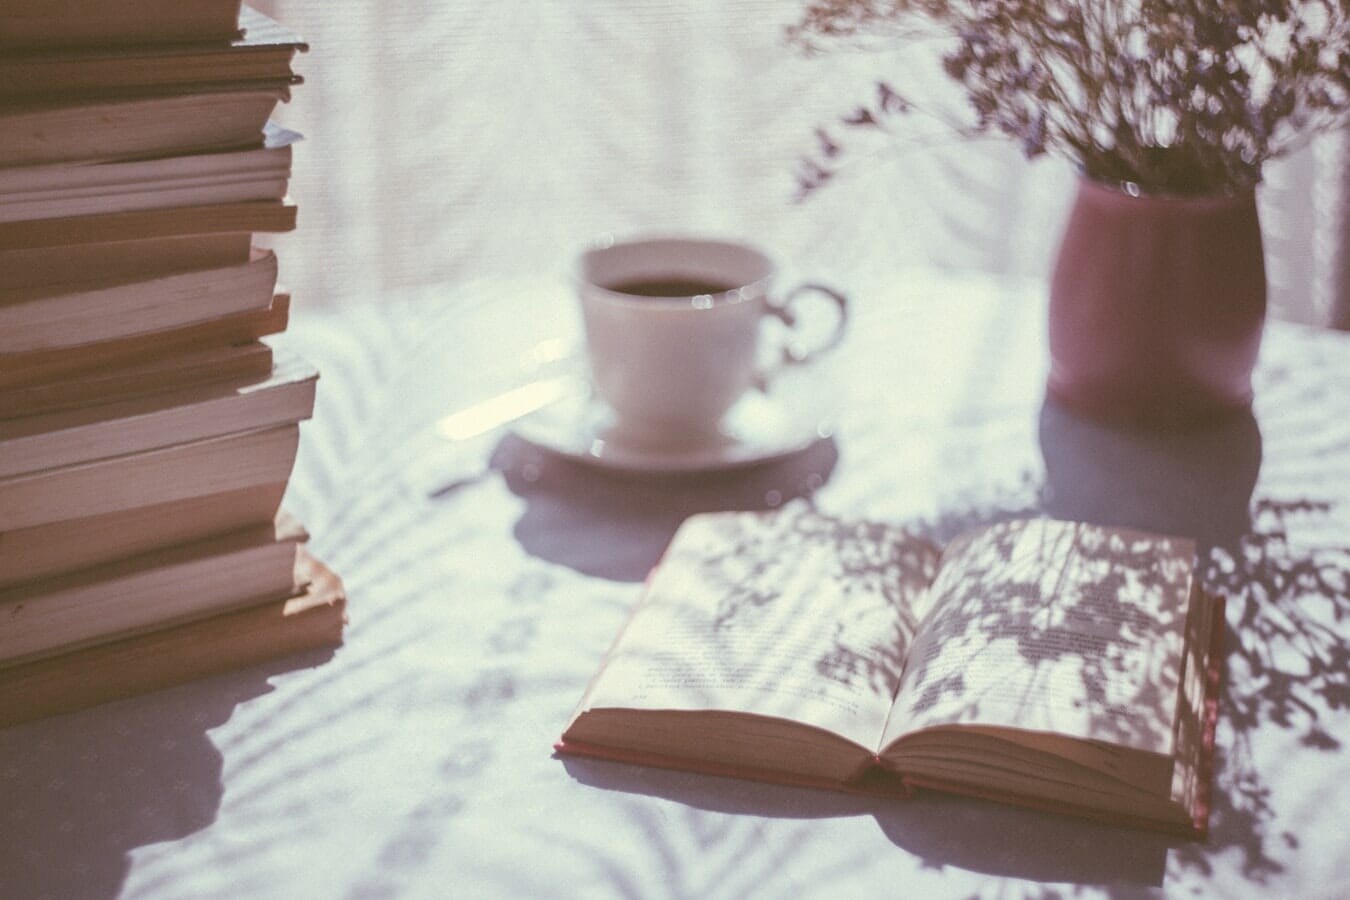 A stack of books and a cup of coffee on a table, offering an insider's perspective.